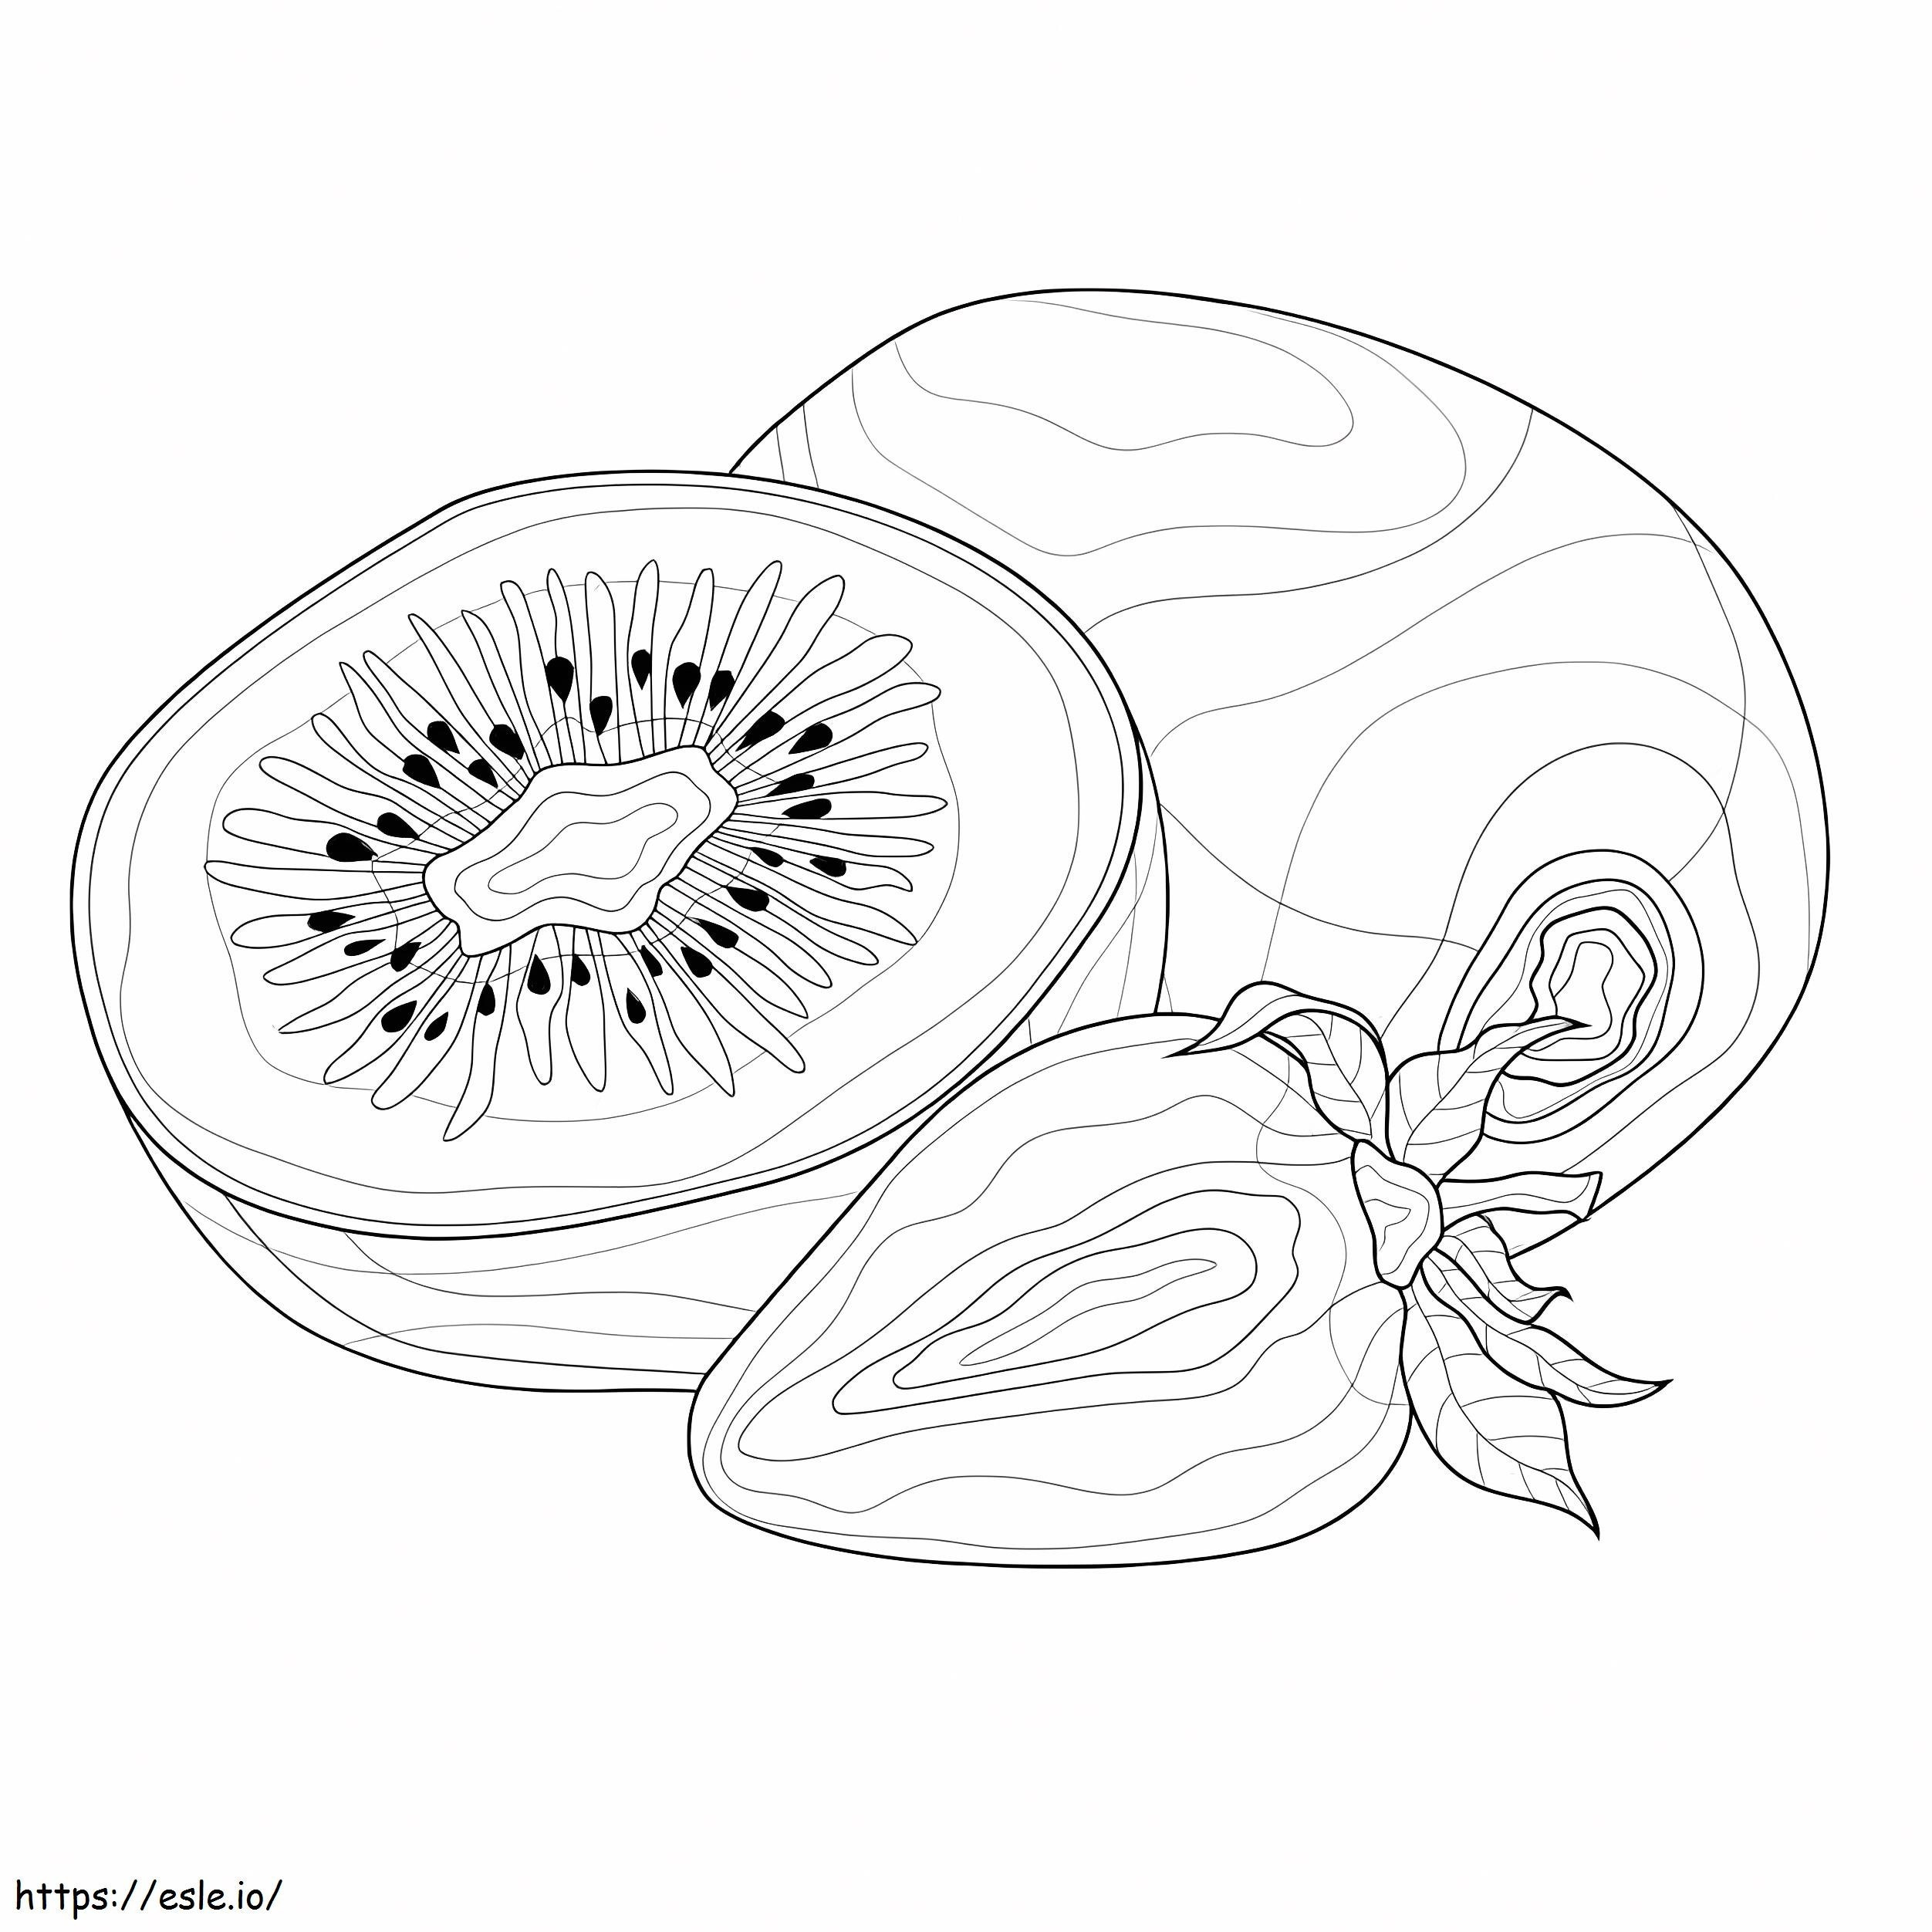 Kiwi And Strawberry coloring page